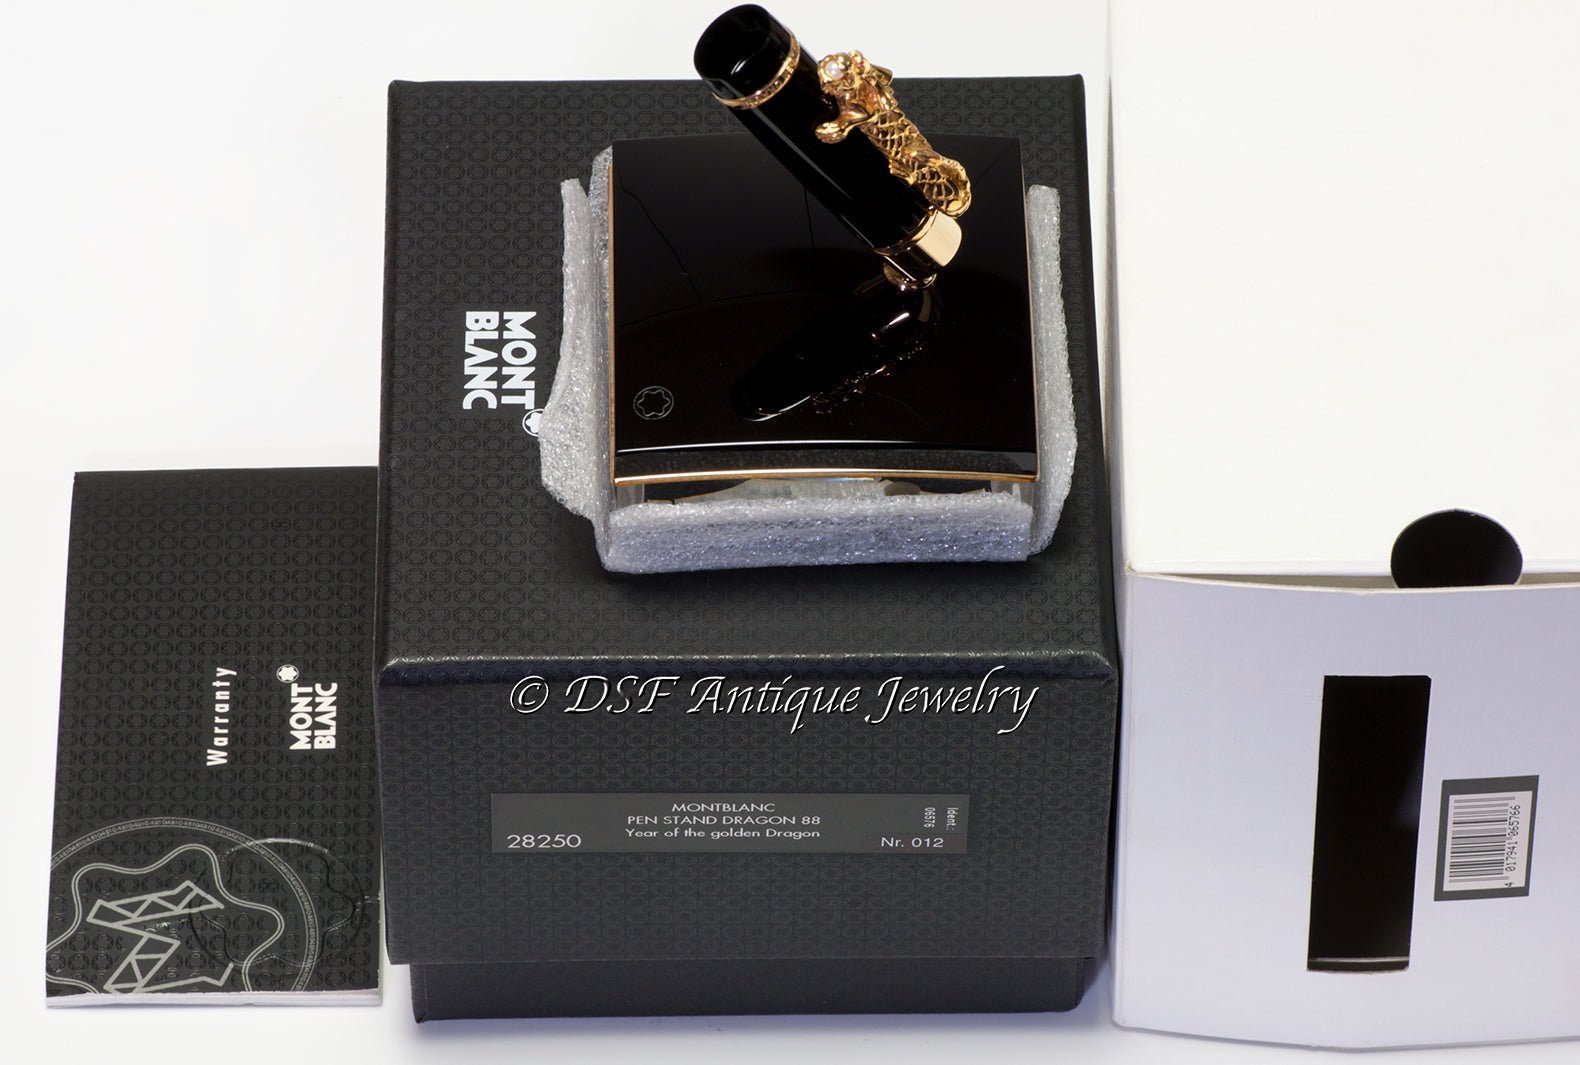 Montblanc Year of the Golden Dragon Limited Edition 2000 Fountain Pen